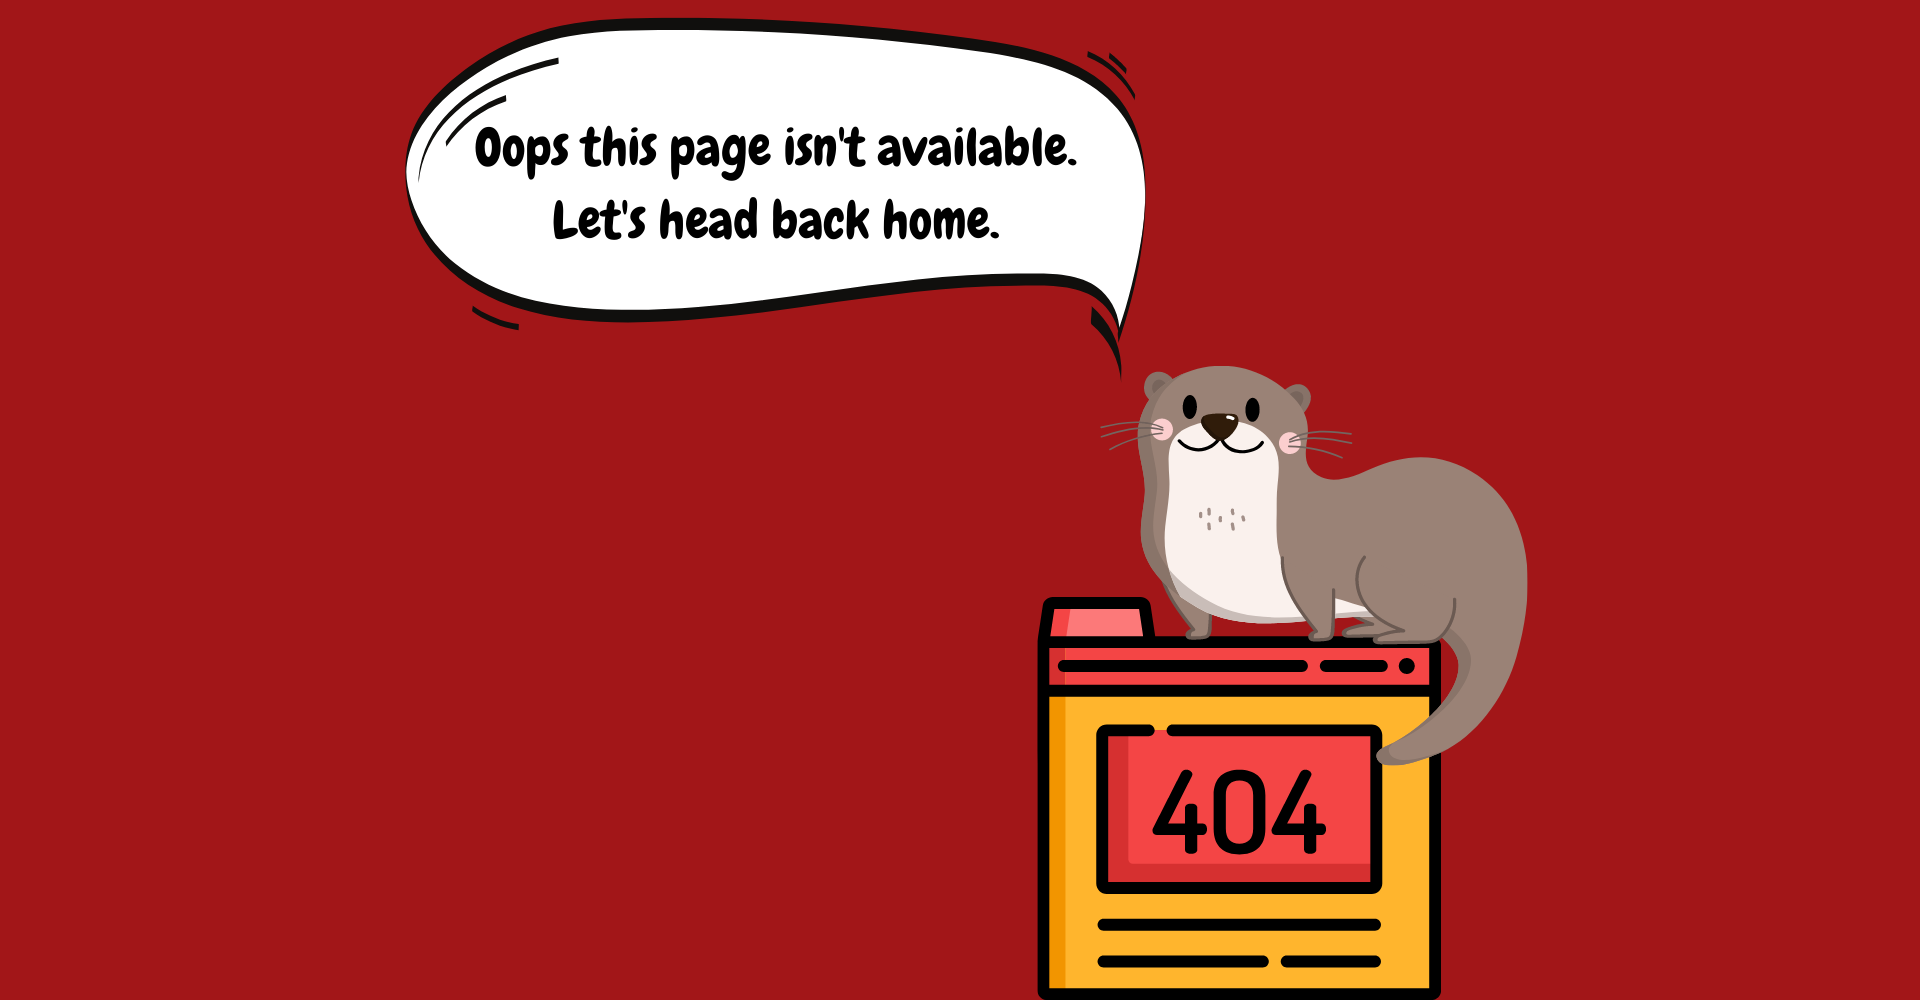 404 error page not found, the link may be broken or may have been removed. Head back to VitaminSeafood Main Home Page.